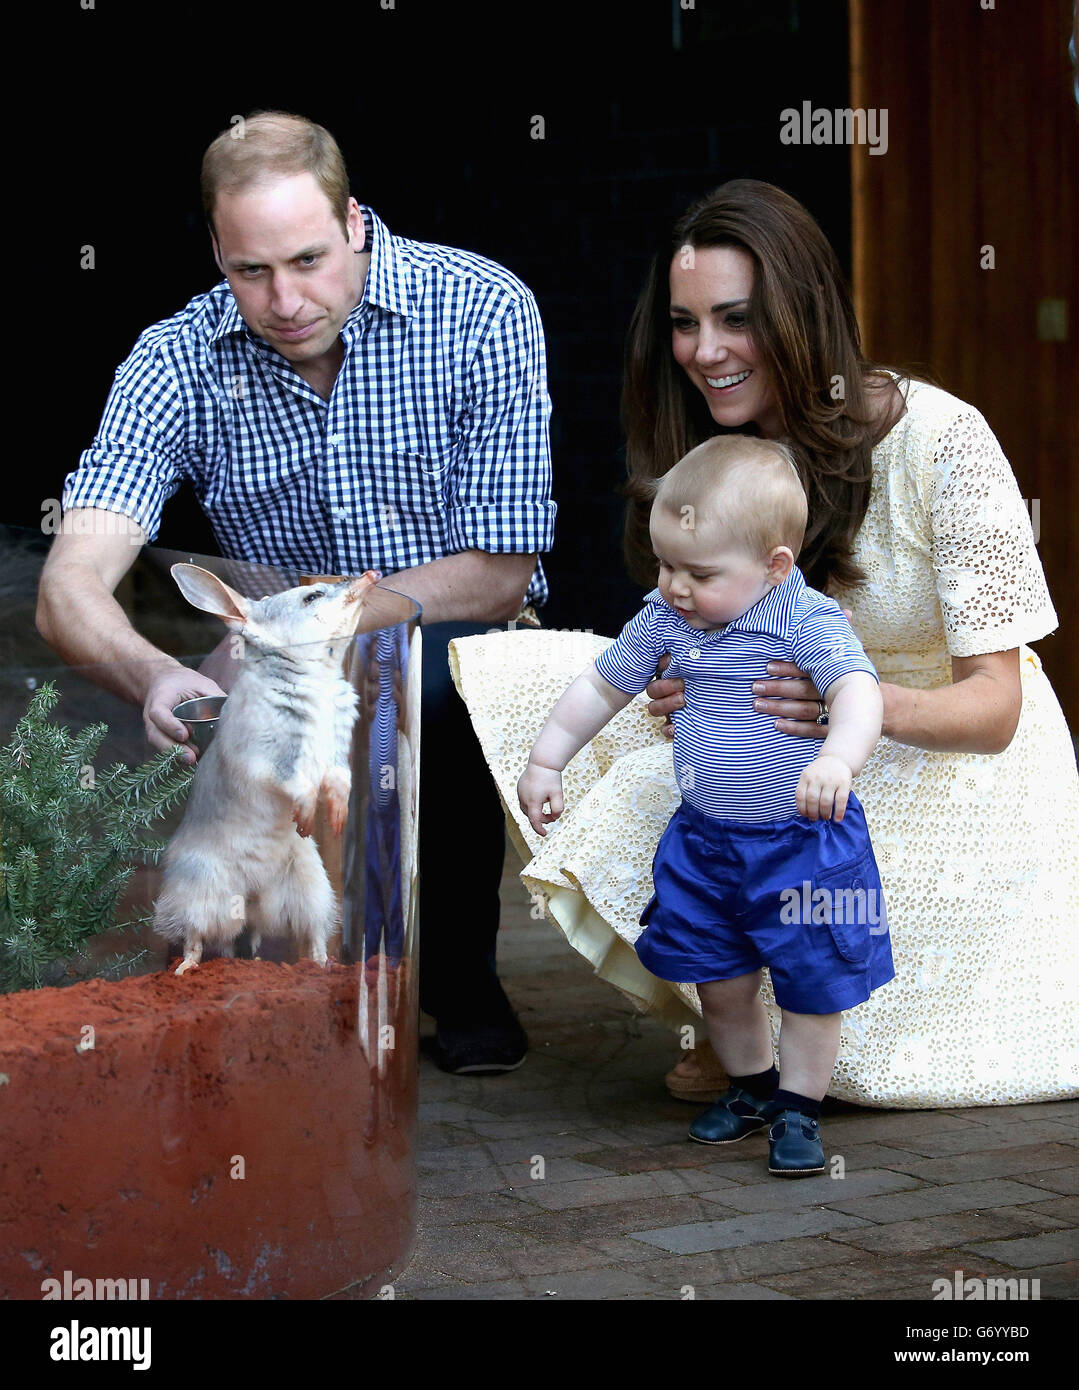 The Duke and Duchess of Cambridge and Prince George of Cambridge look at a Bilby called George at Taronga Zoo in Sydney, Australia, The Duke and Duchess of Cambridge are on a three-week tour of Australia and New Zealand. Stock Photo